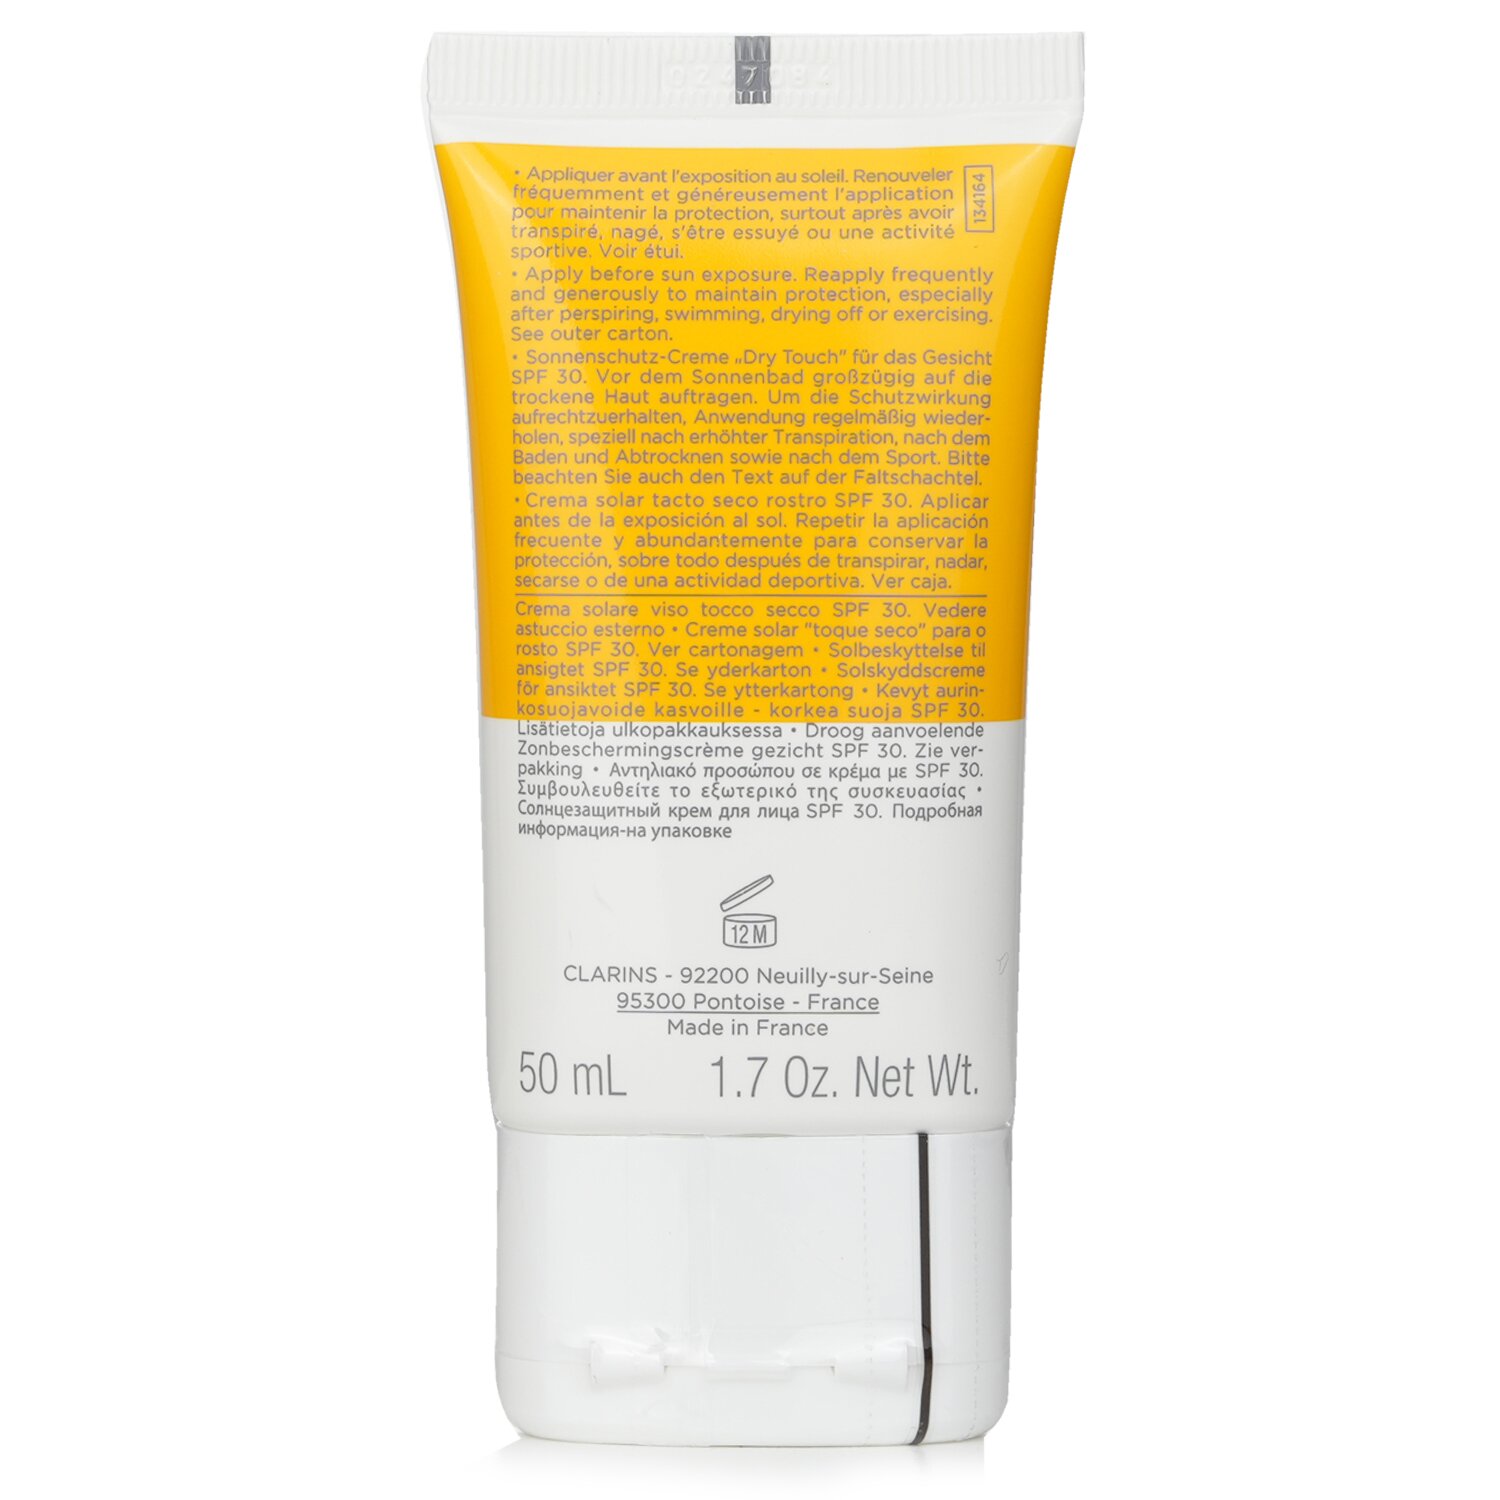 Clarins Dry Touch Sun Care Cream For Face SPF 30 50ml/1.7oz